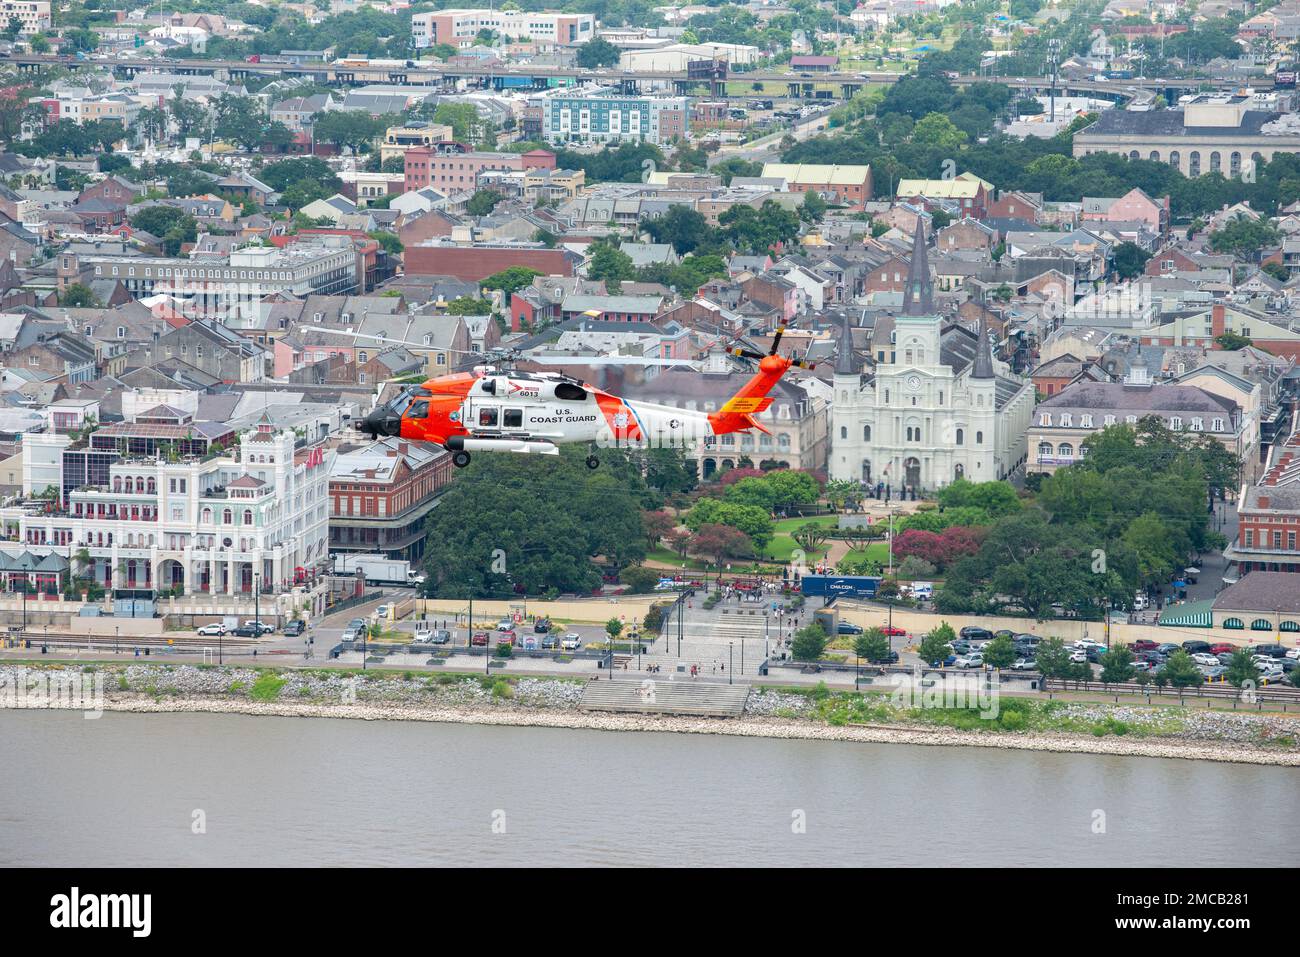 Air Station New Orleans MH-60 helicopter flies over Jackson Square following a formation flight June 28, 2022 in New Orleans, LA.  The MH-60 helicopters will be replacing the MH-65’s at Air Station New Orleans after a transitional period. Stock Photo